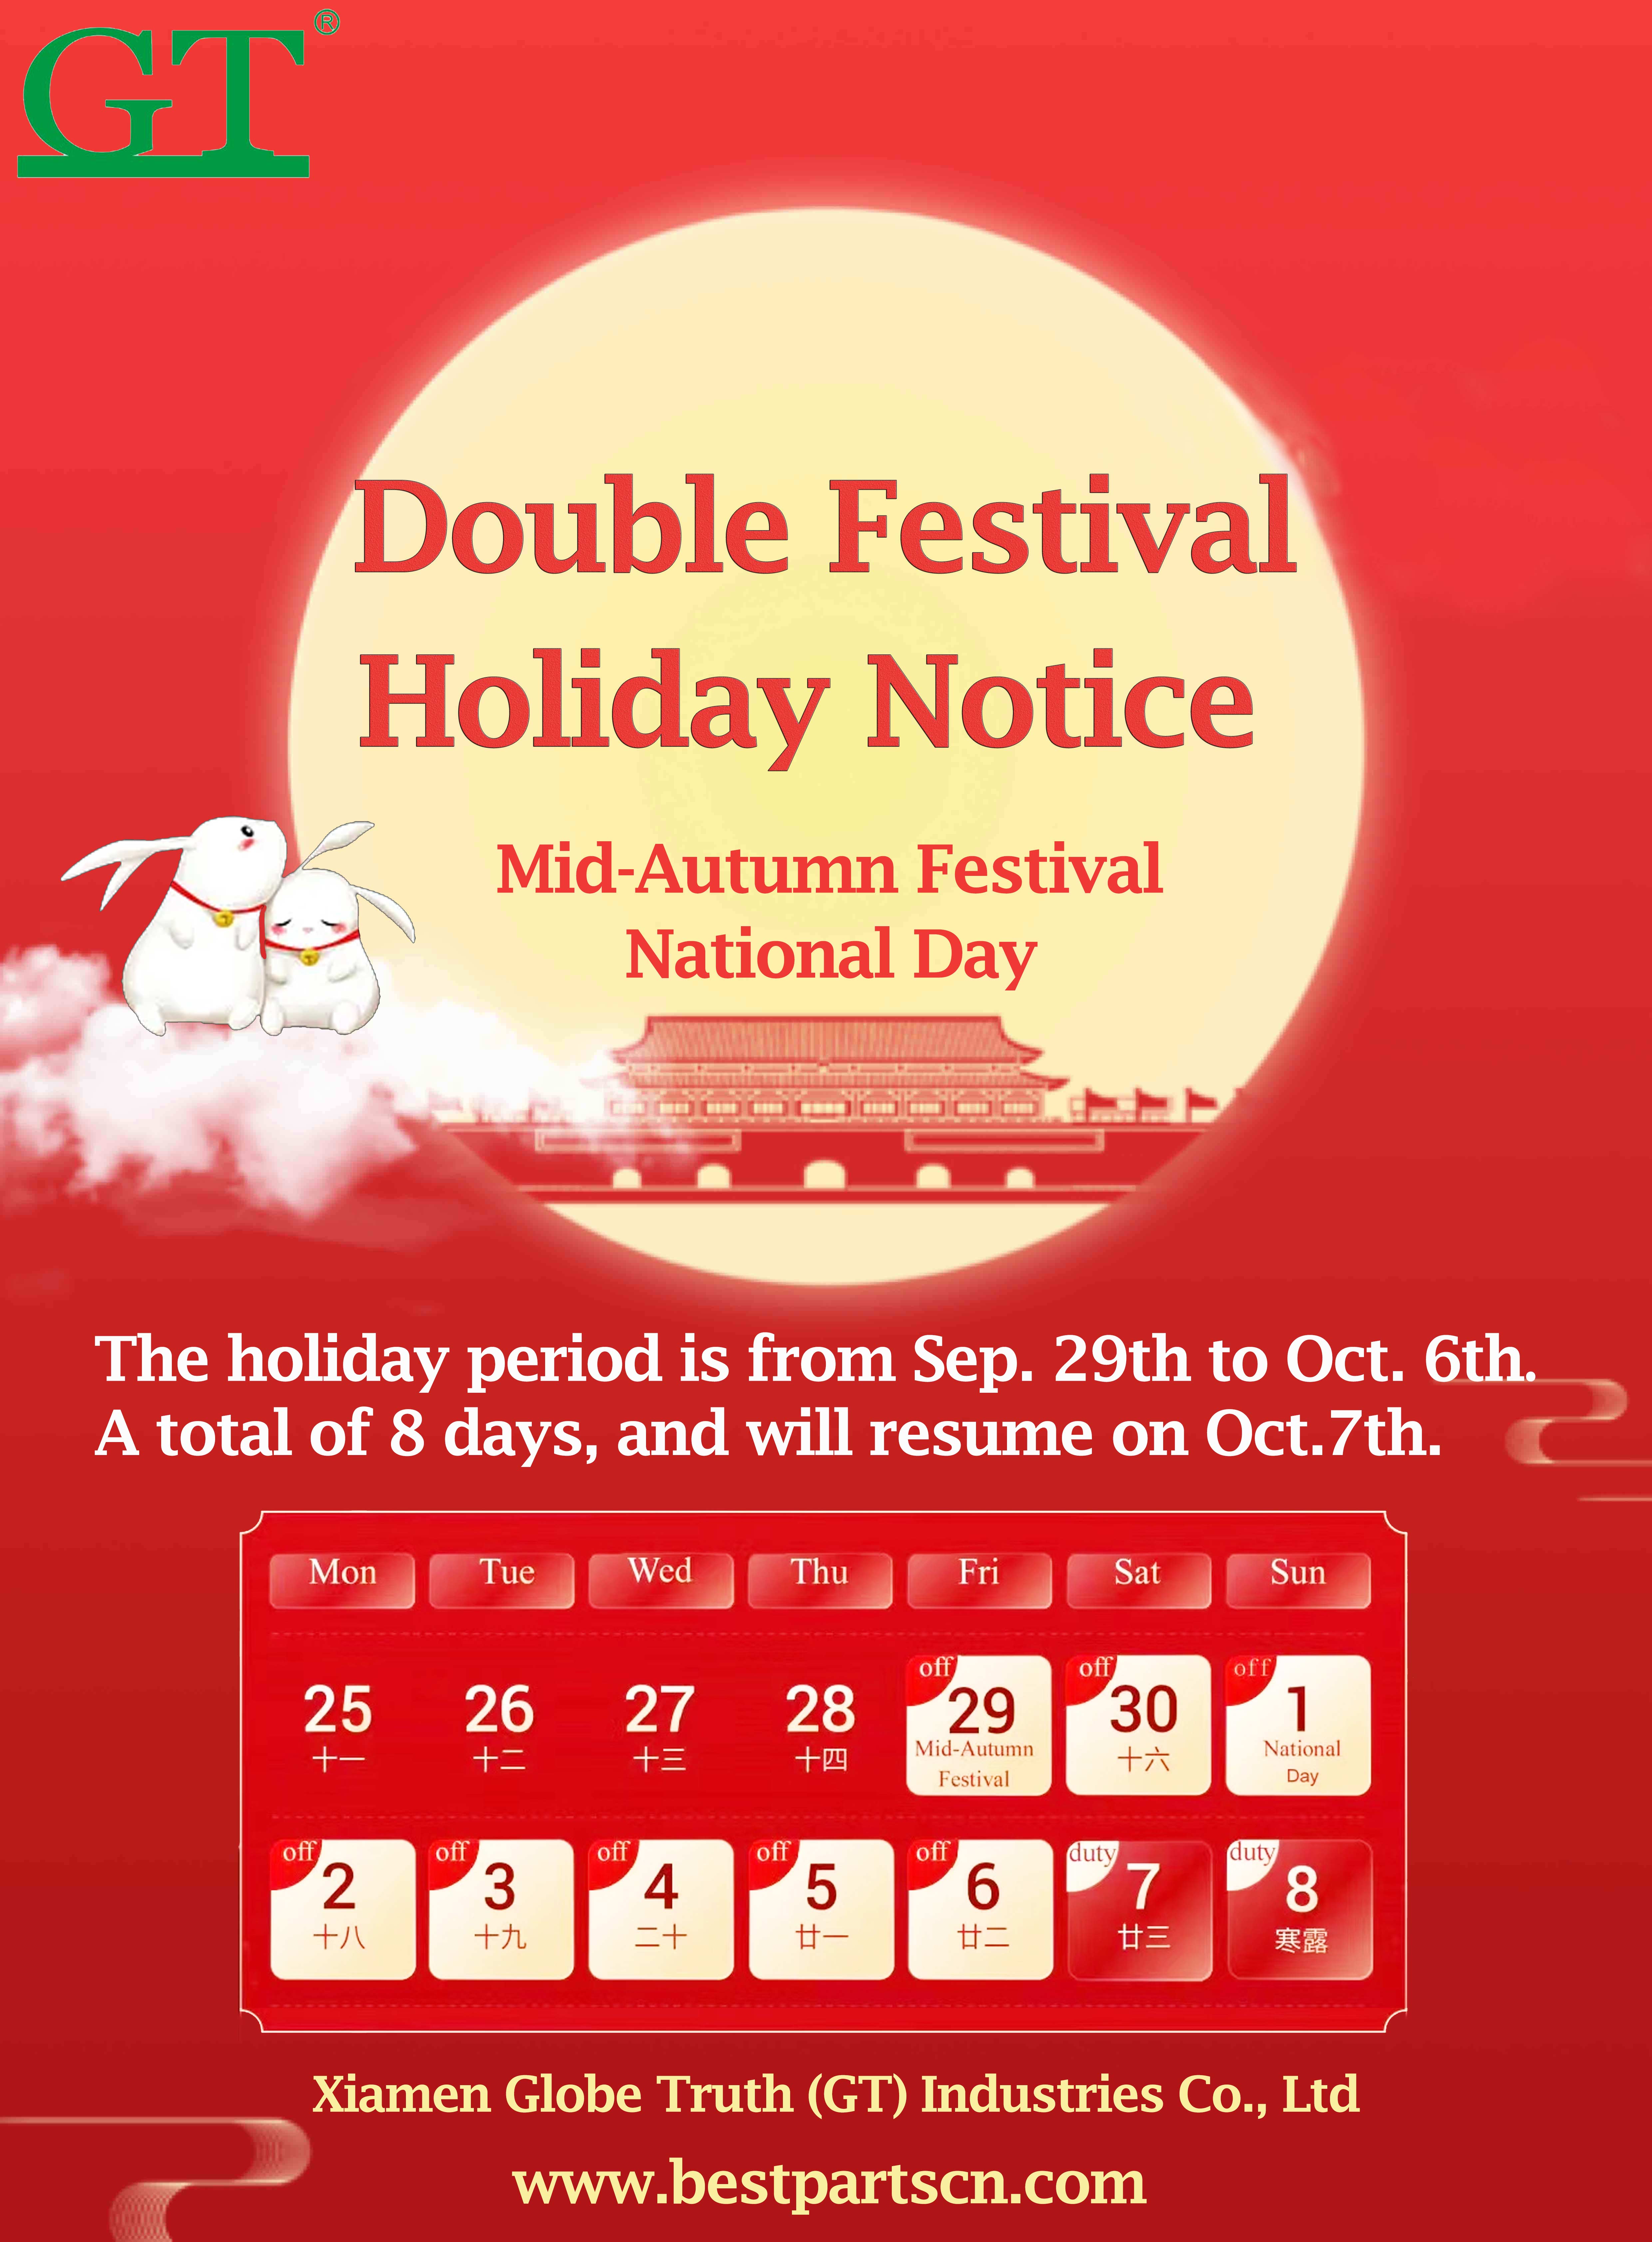 Double Festival Holiday Notice